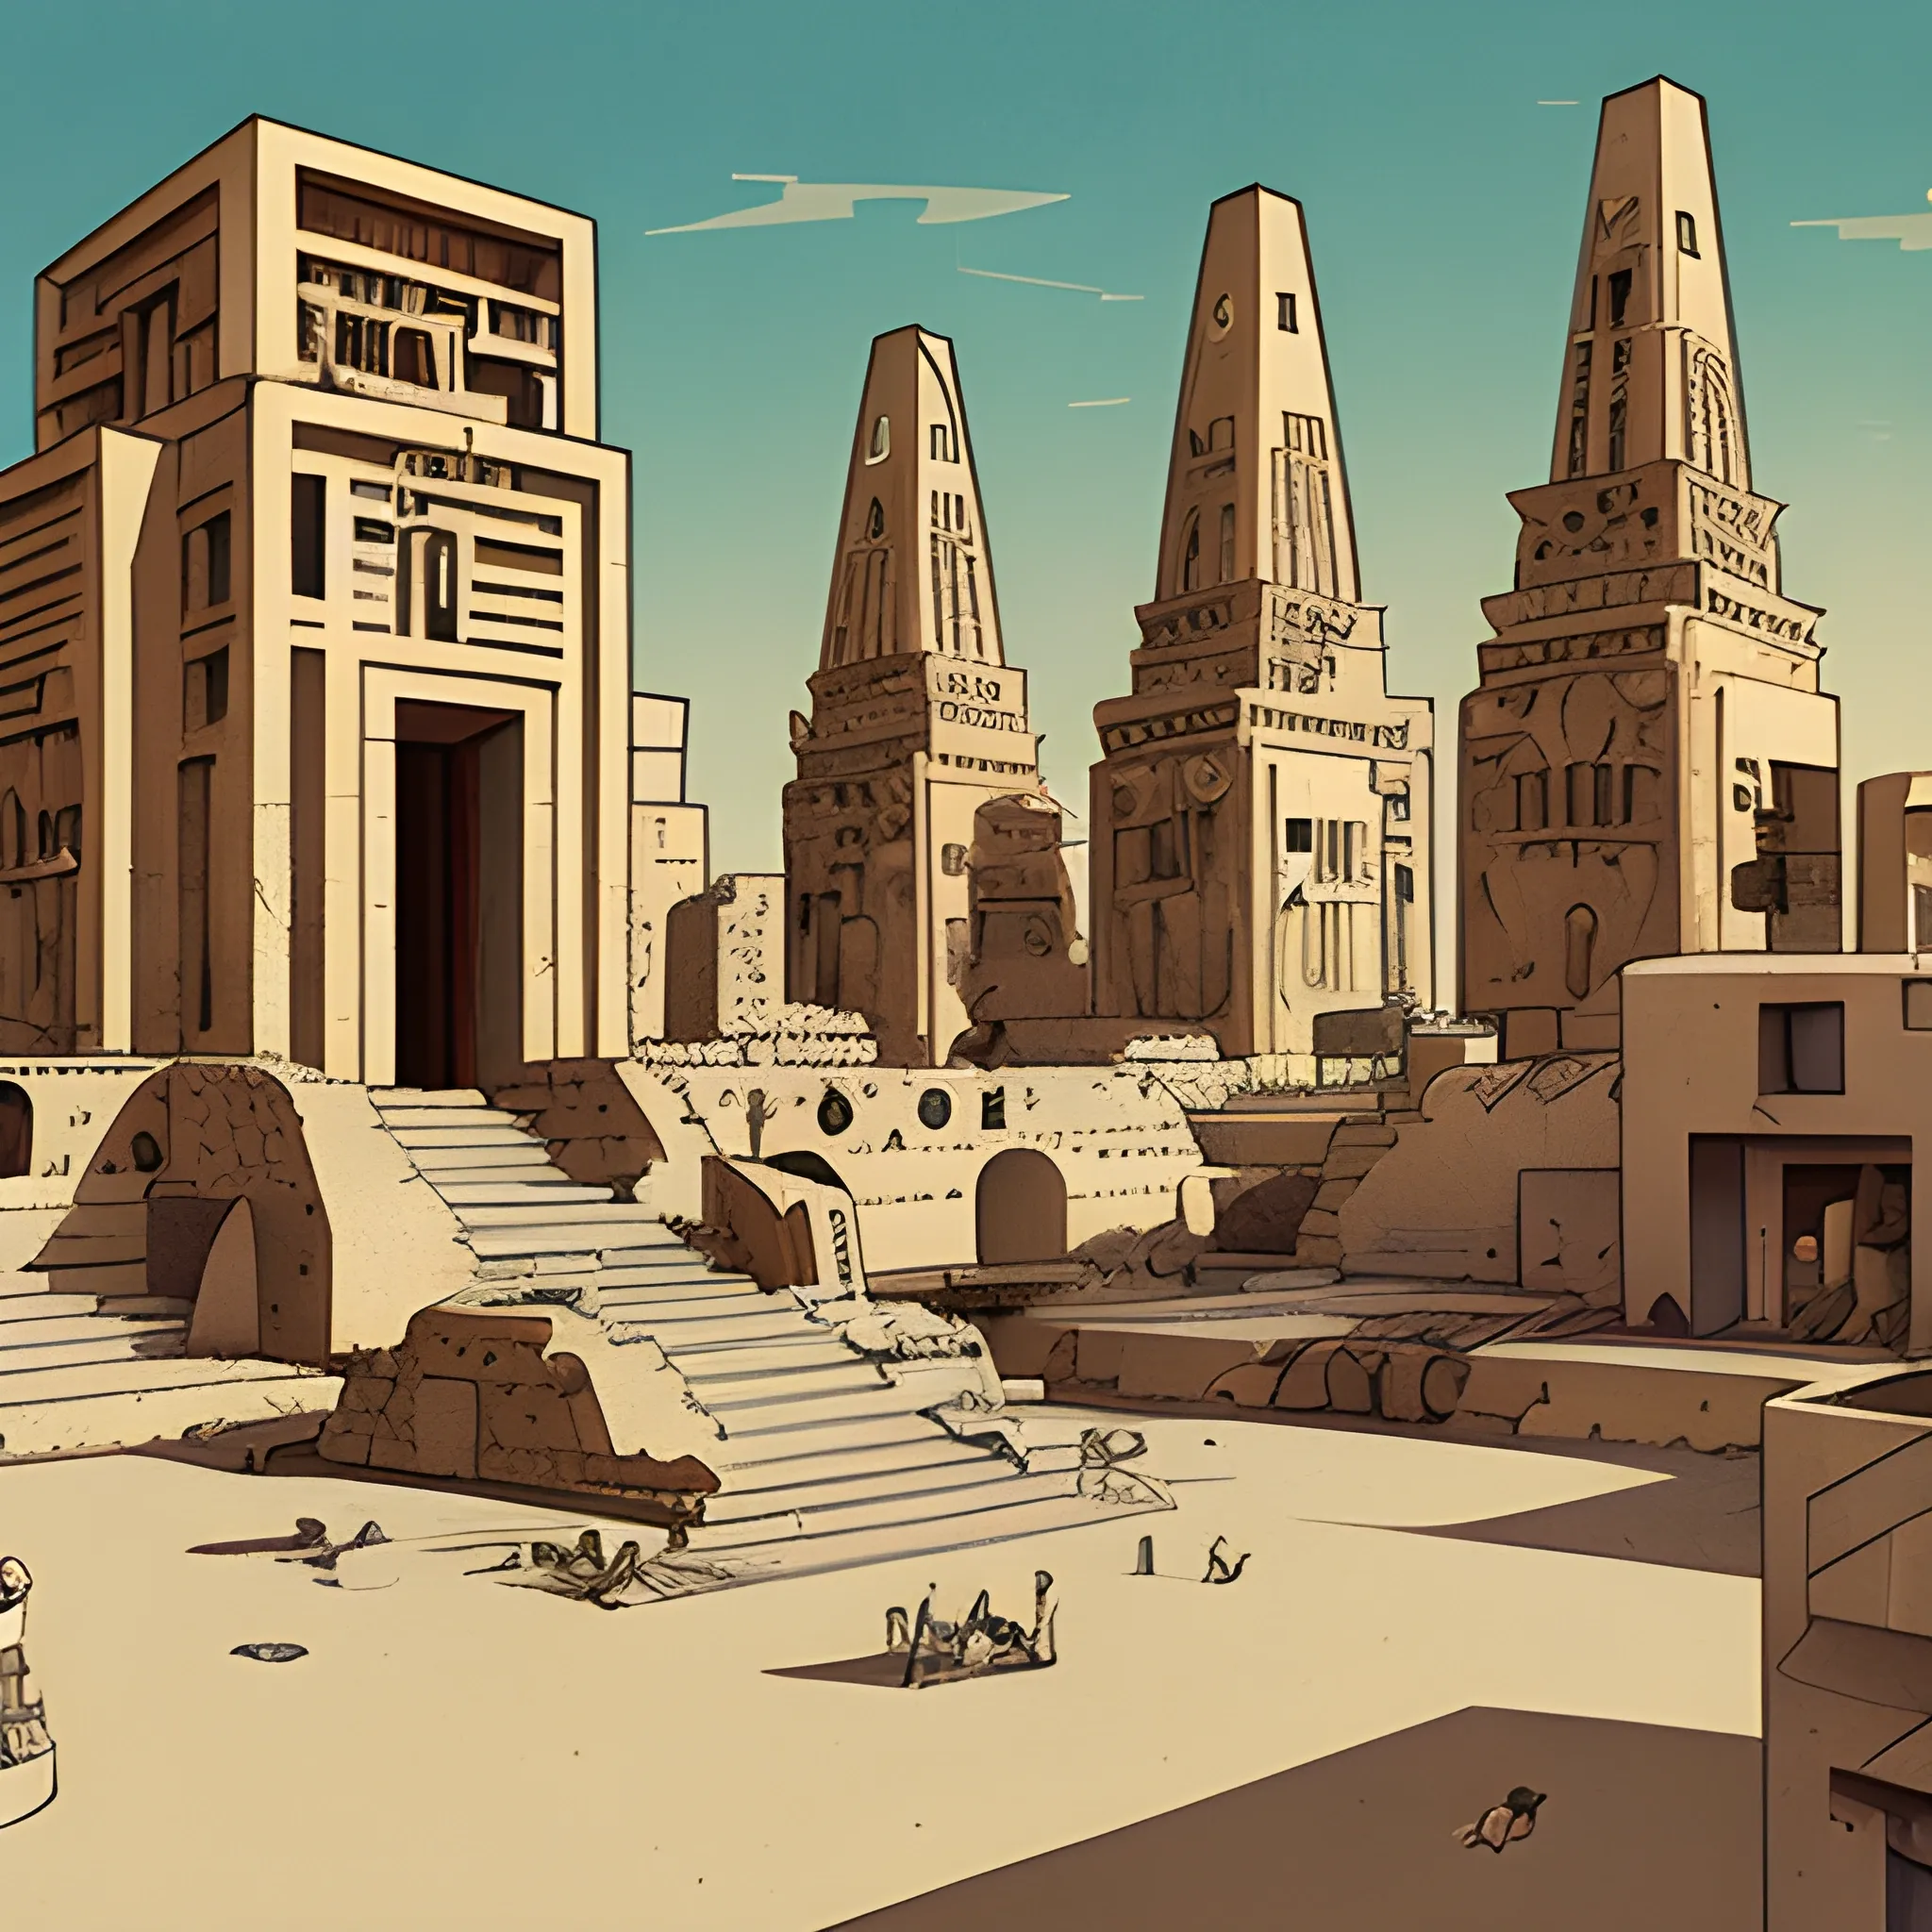 1960's Ciaro, neobyzantine architecture mixed with aspects of egyptian architecture, drawn in Jeaan Giraud's art style